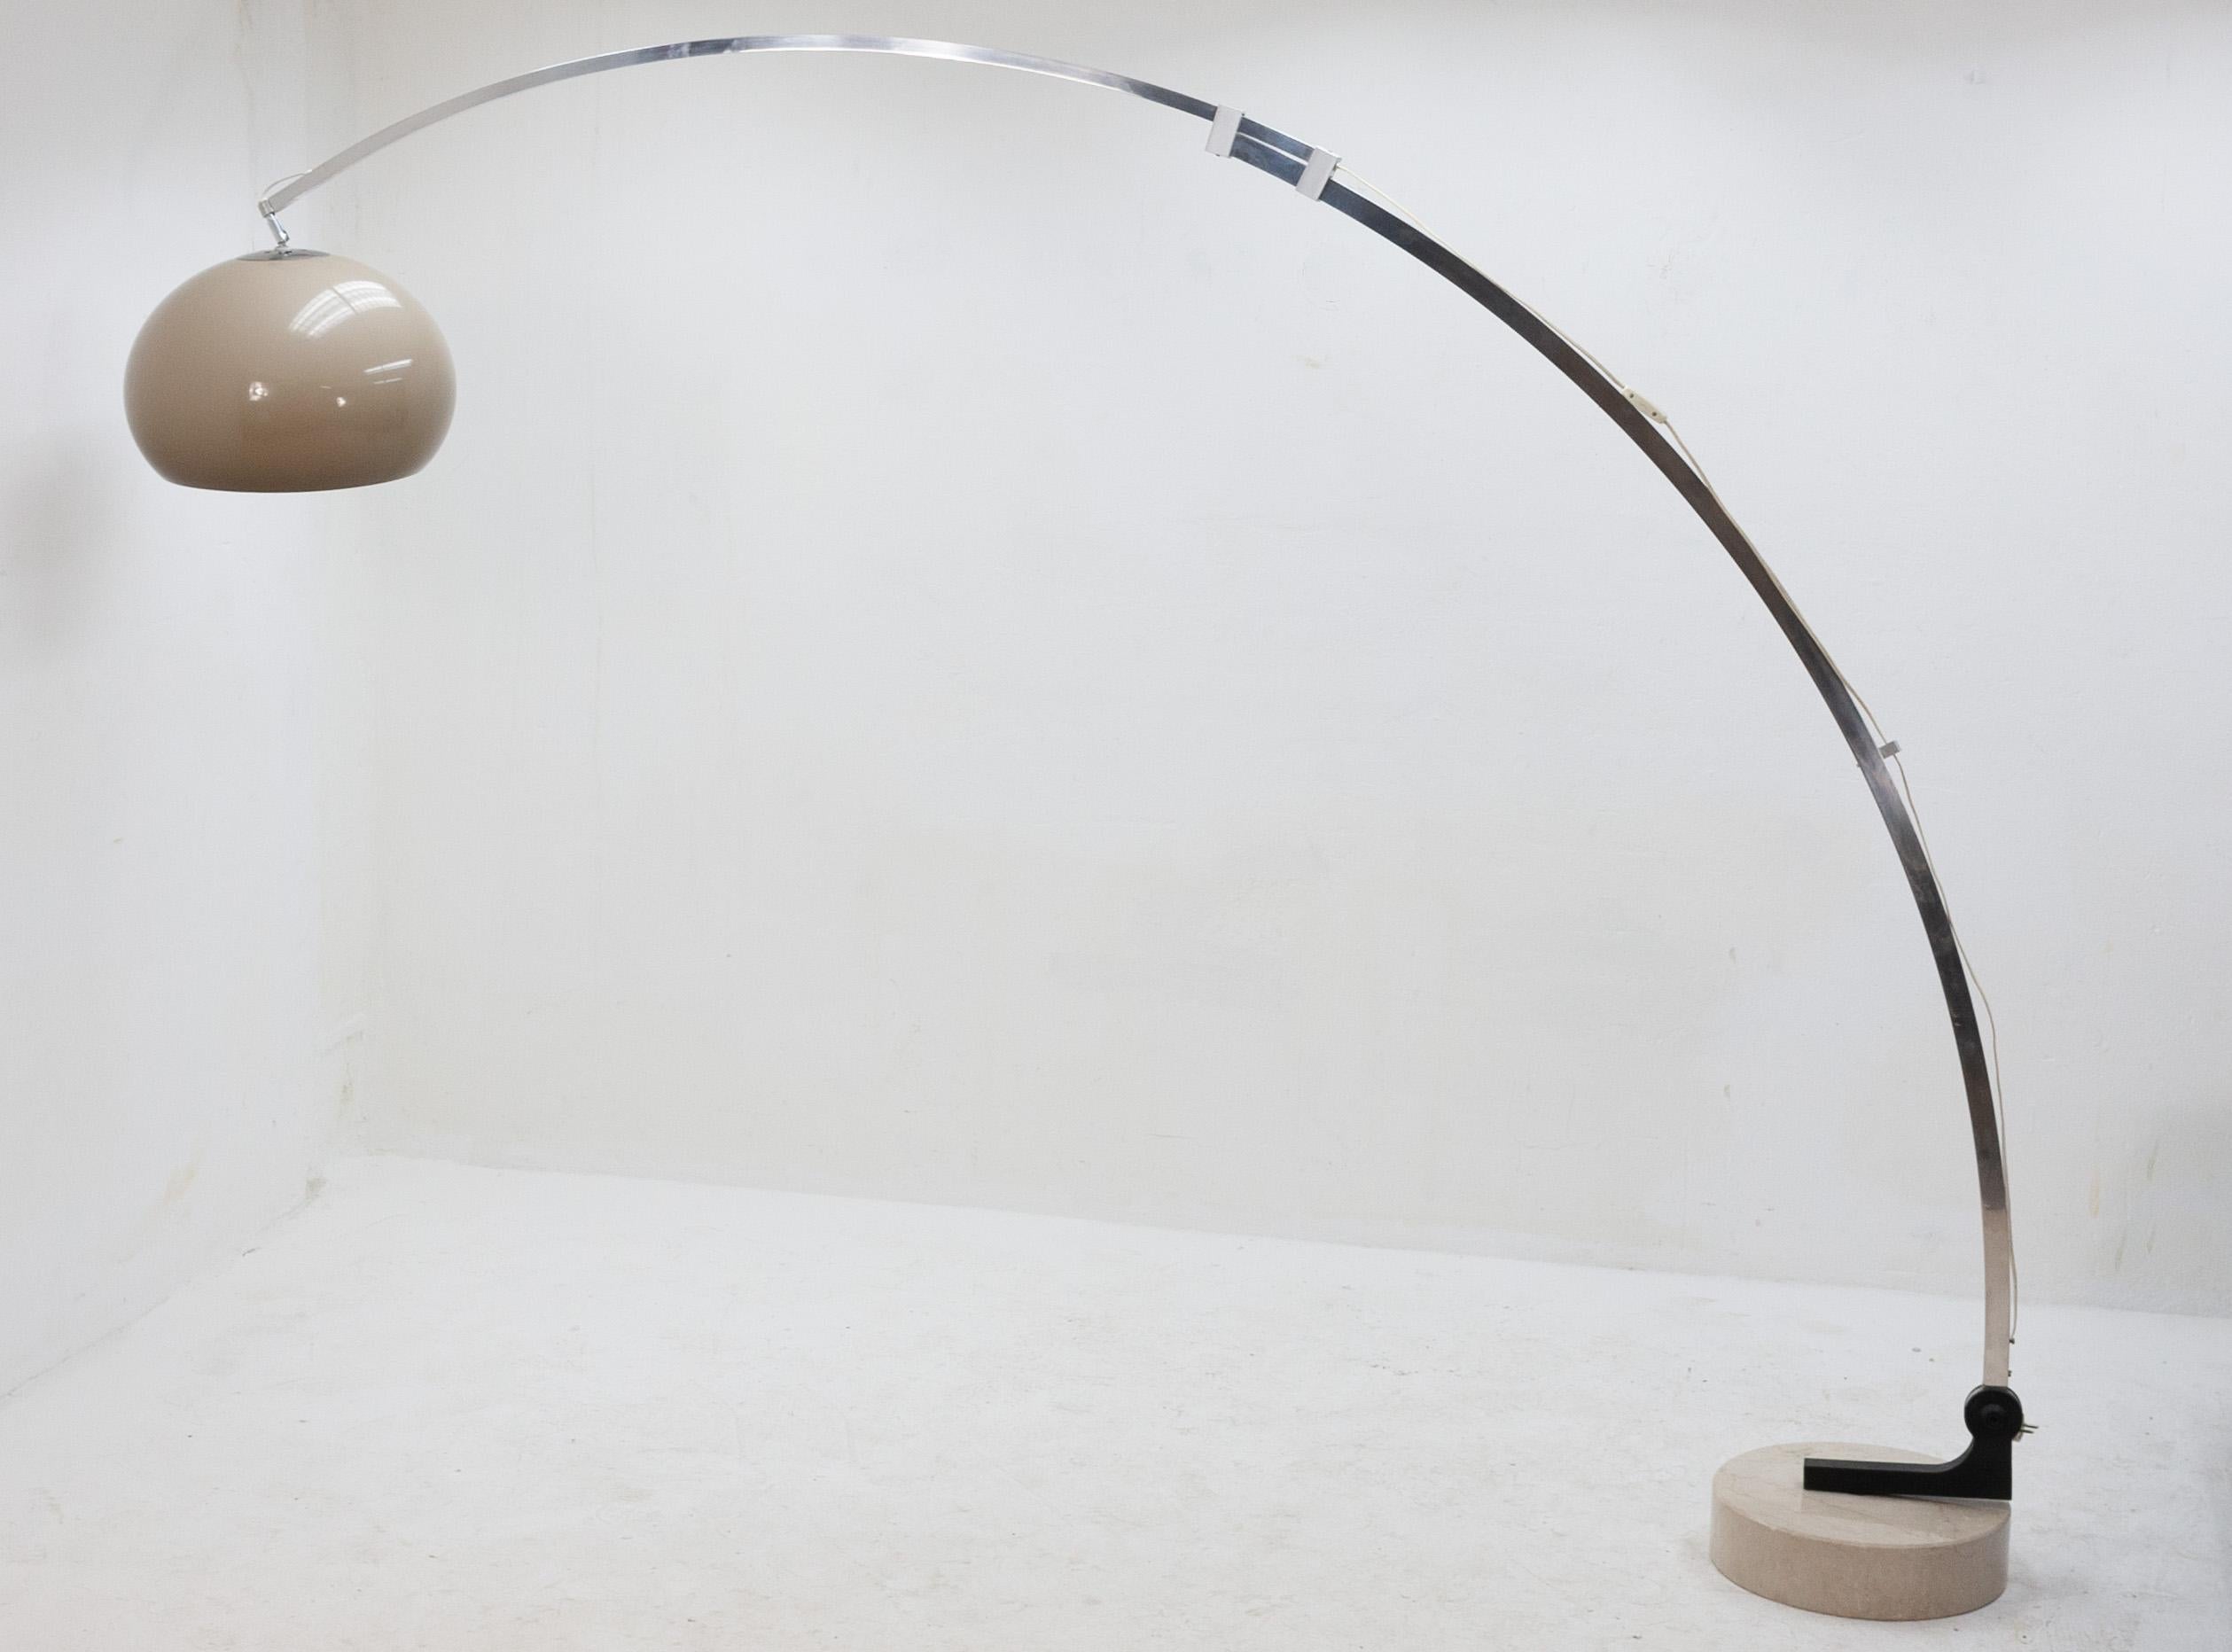 Very large Italian arc lamp with a heavy marble base and its original mocha Perspex lampshade. The arm is hinged at the base allowing the angle of the arm to be adjusted and the segments of the arm telescope to adjust the reach.